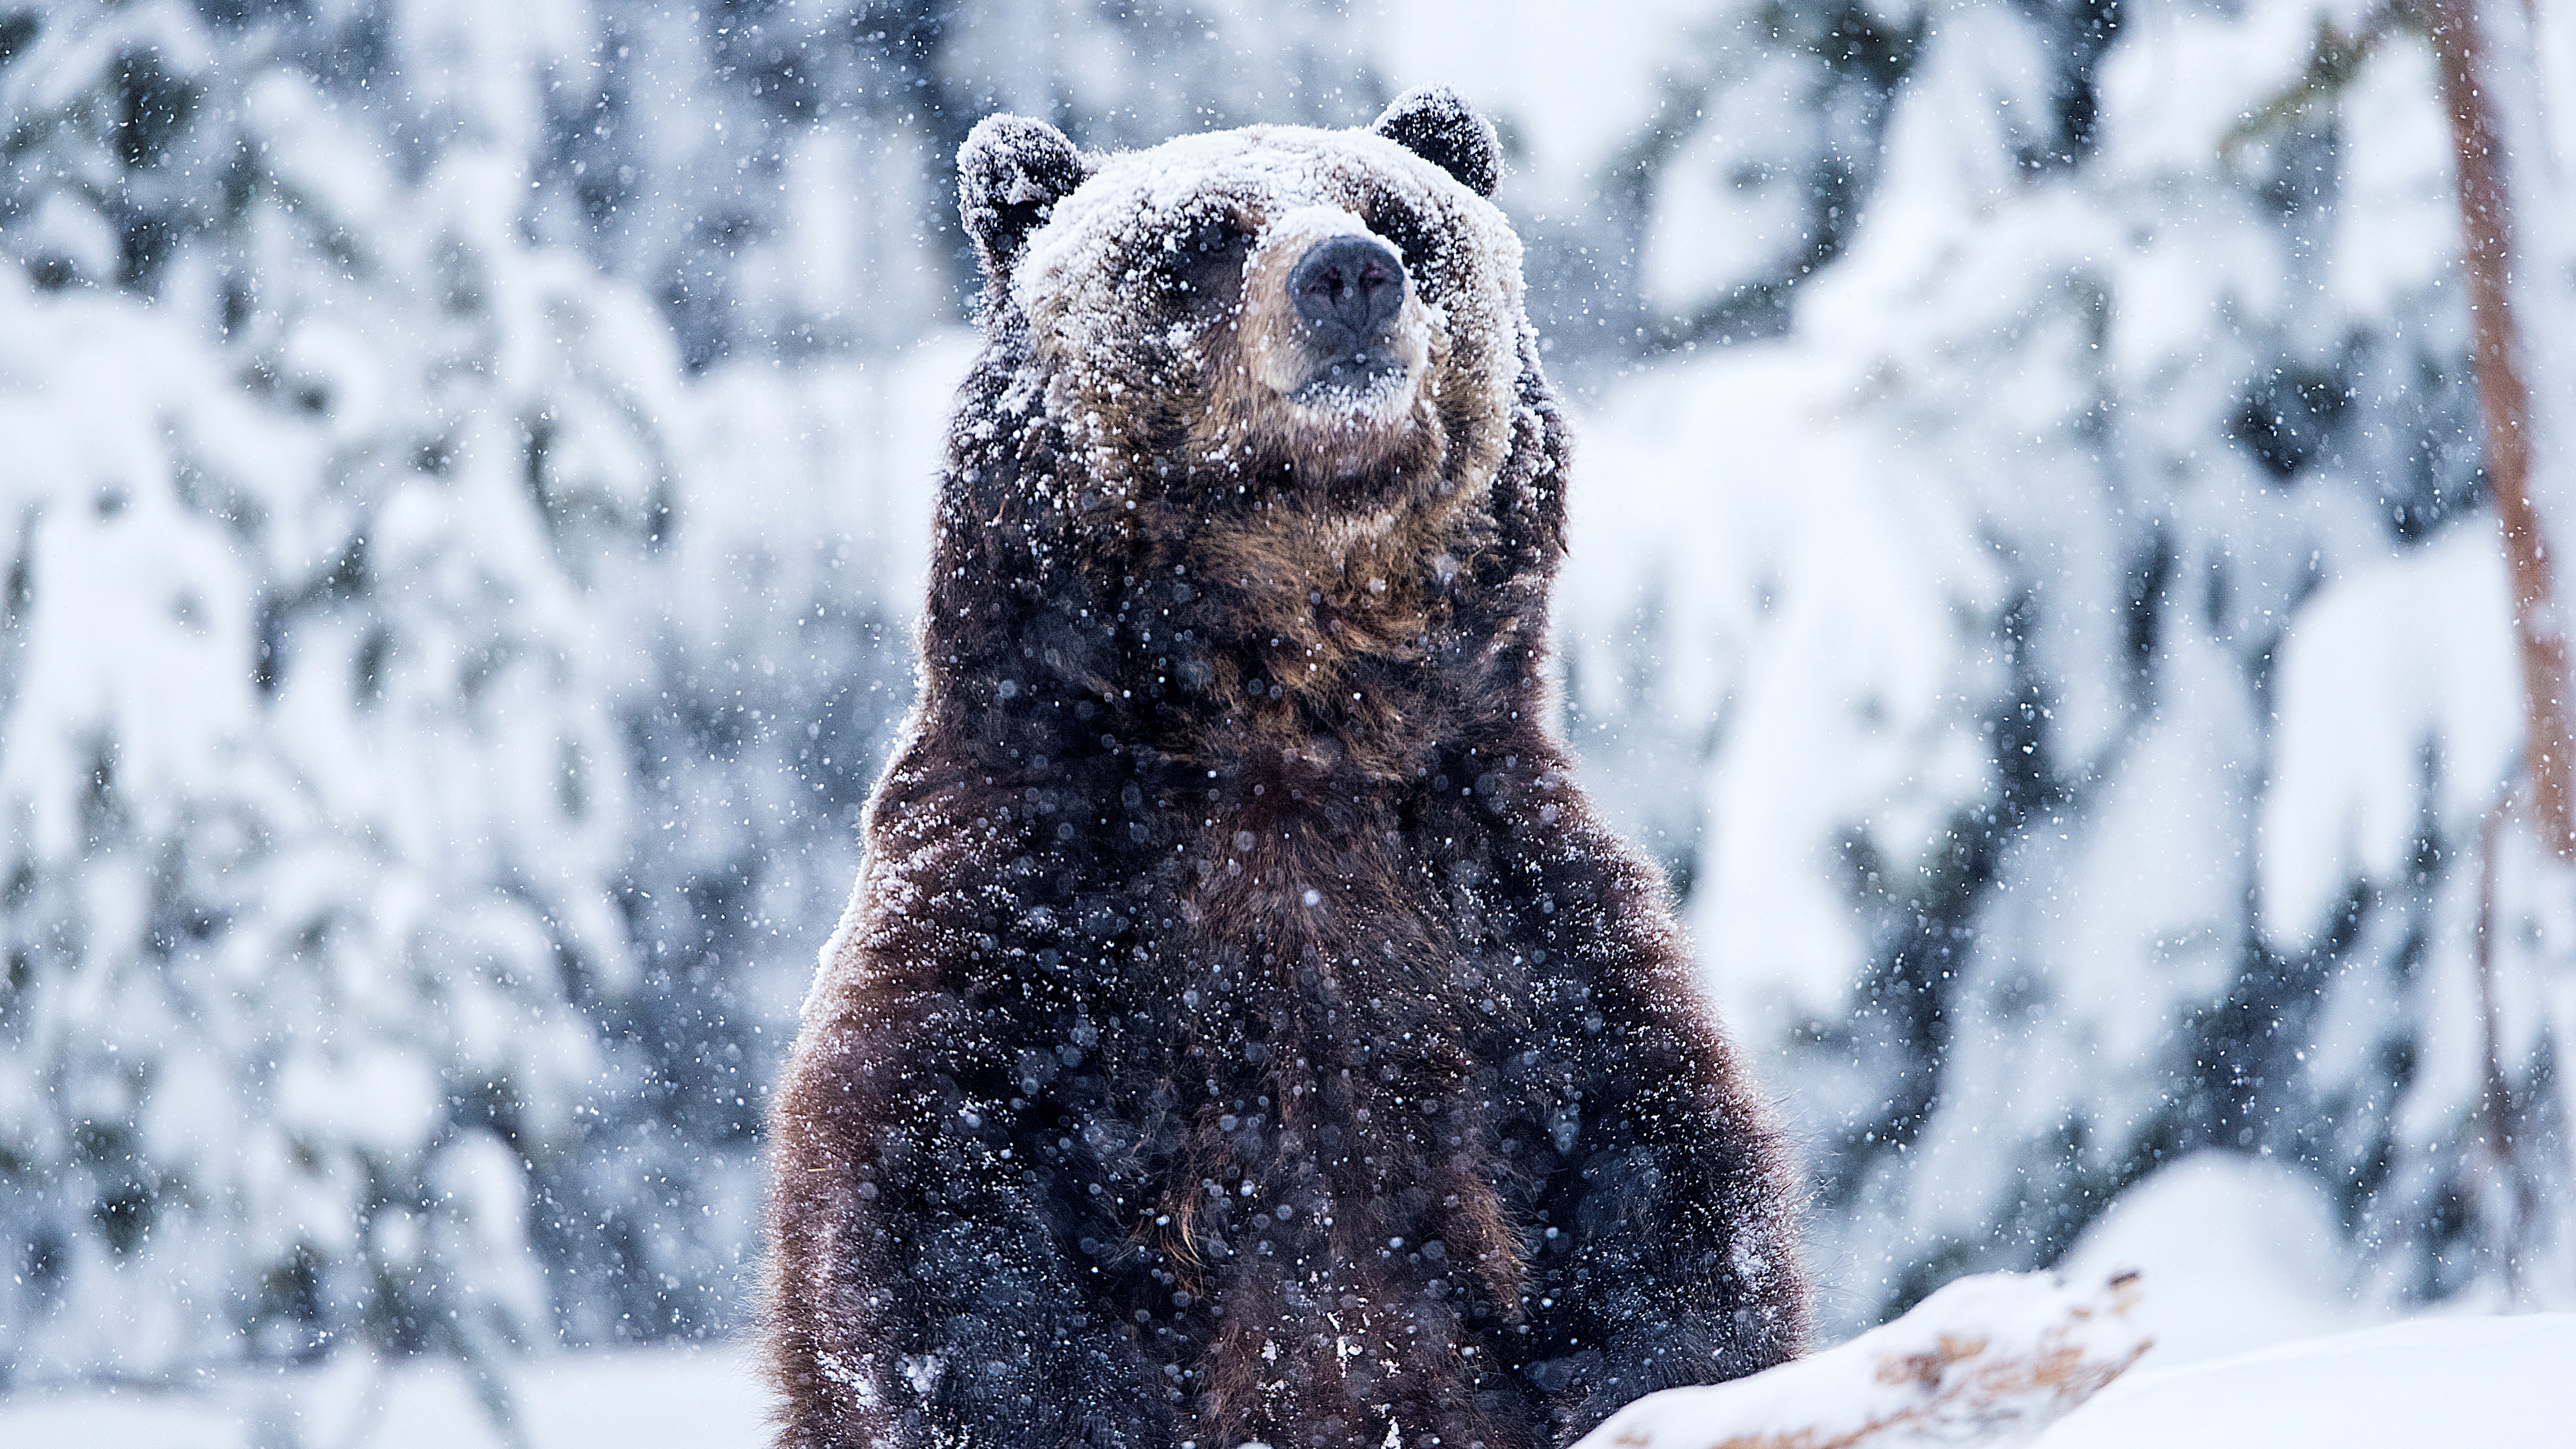 Do you still need to worry about bears in winter? | Advnture